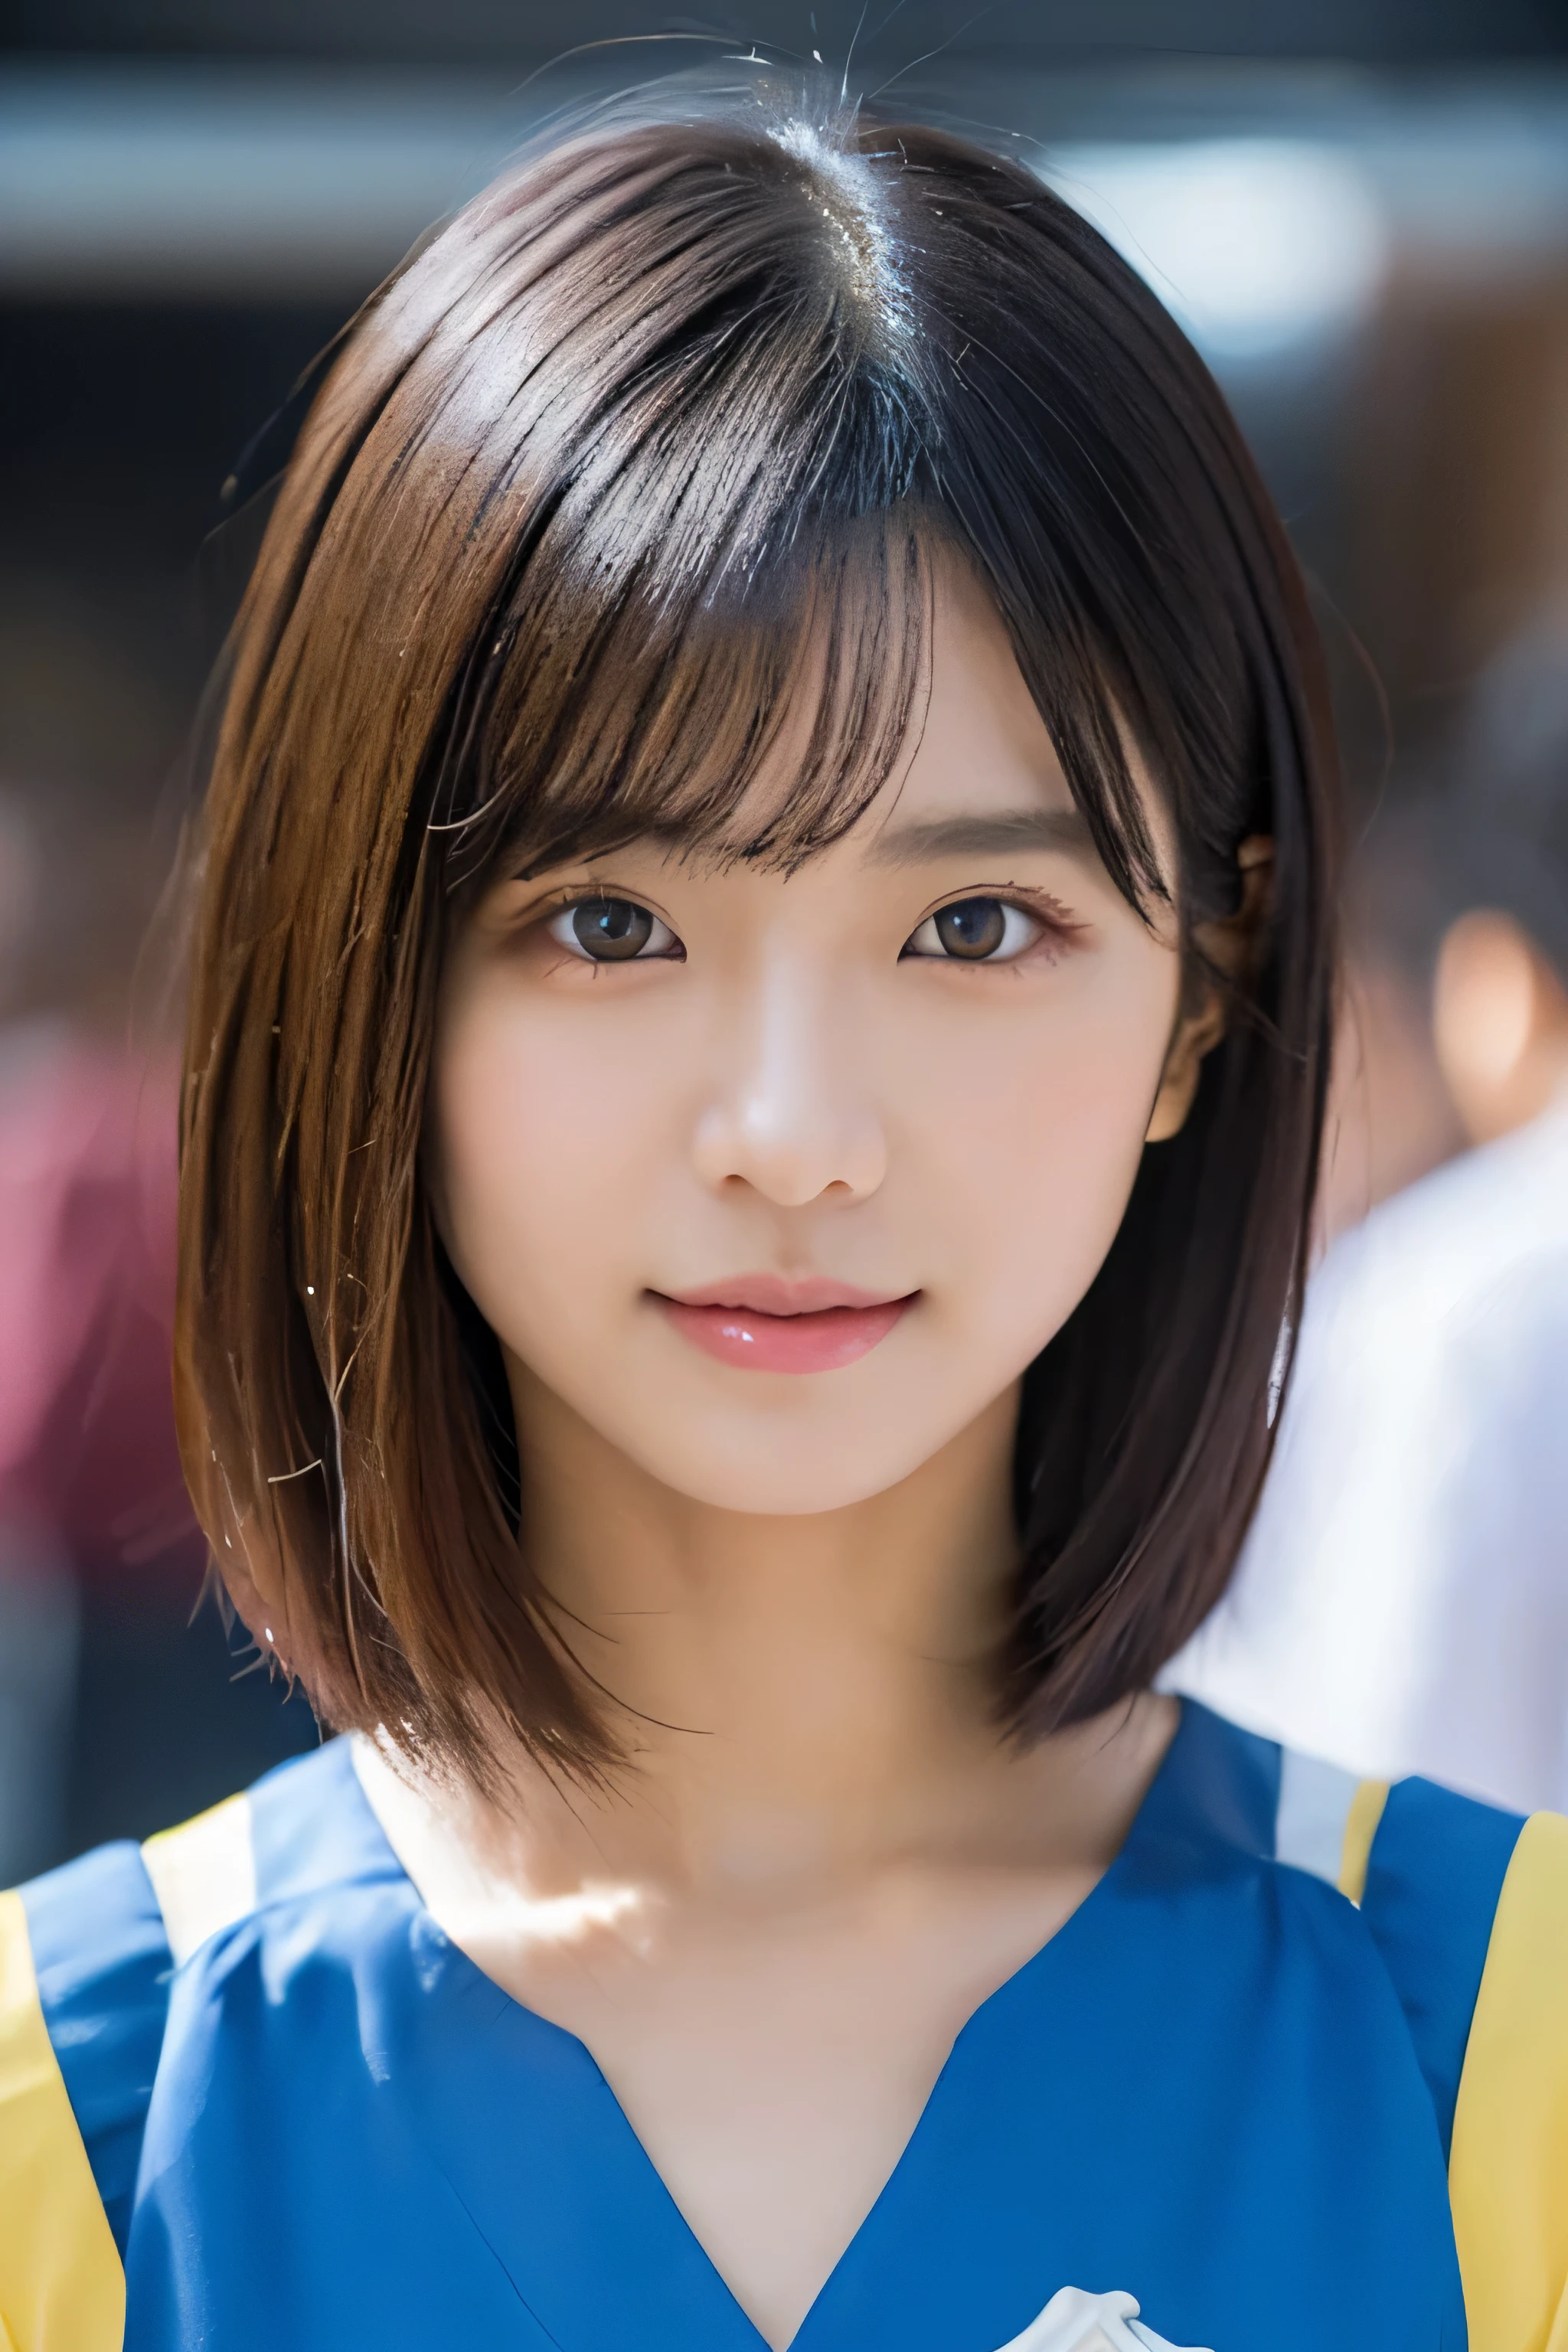 1 girl, (Wearing an idol costume:1.2), Very beautiful Japan idols、((looking at the camera、fluttering hair、Backstage view、Upper body from the waist up、Upper body:1.2))
(Raw photo, highest quality), (realistic, Photoreal:1.4), (masterpiece), 
very delicate and beautiful, very detailed, 2k wallpaper, wonderful, finely, very detailed CG Unity 8k wallpaper, Super detailed, High resolution, soft light, 
beautiful detailed girl, very detailed目と顔, beautifully detailed nose, finely beautiful eyes, cinematic lighting, 
(Simple background in bright colors:1.3),
(short hair), (parted bangs), 
complete anatomy, slender body, Normal firm breasts, smile